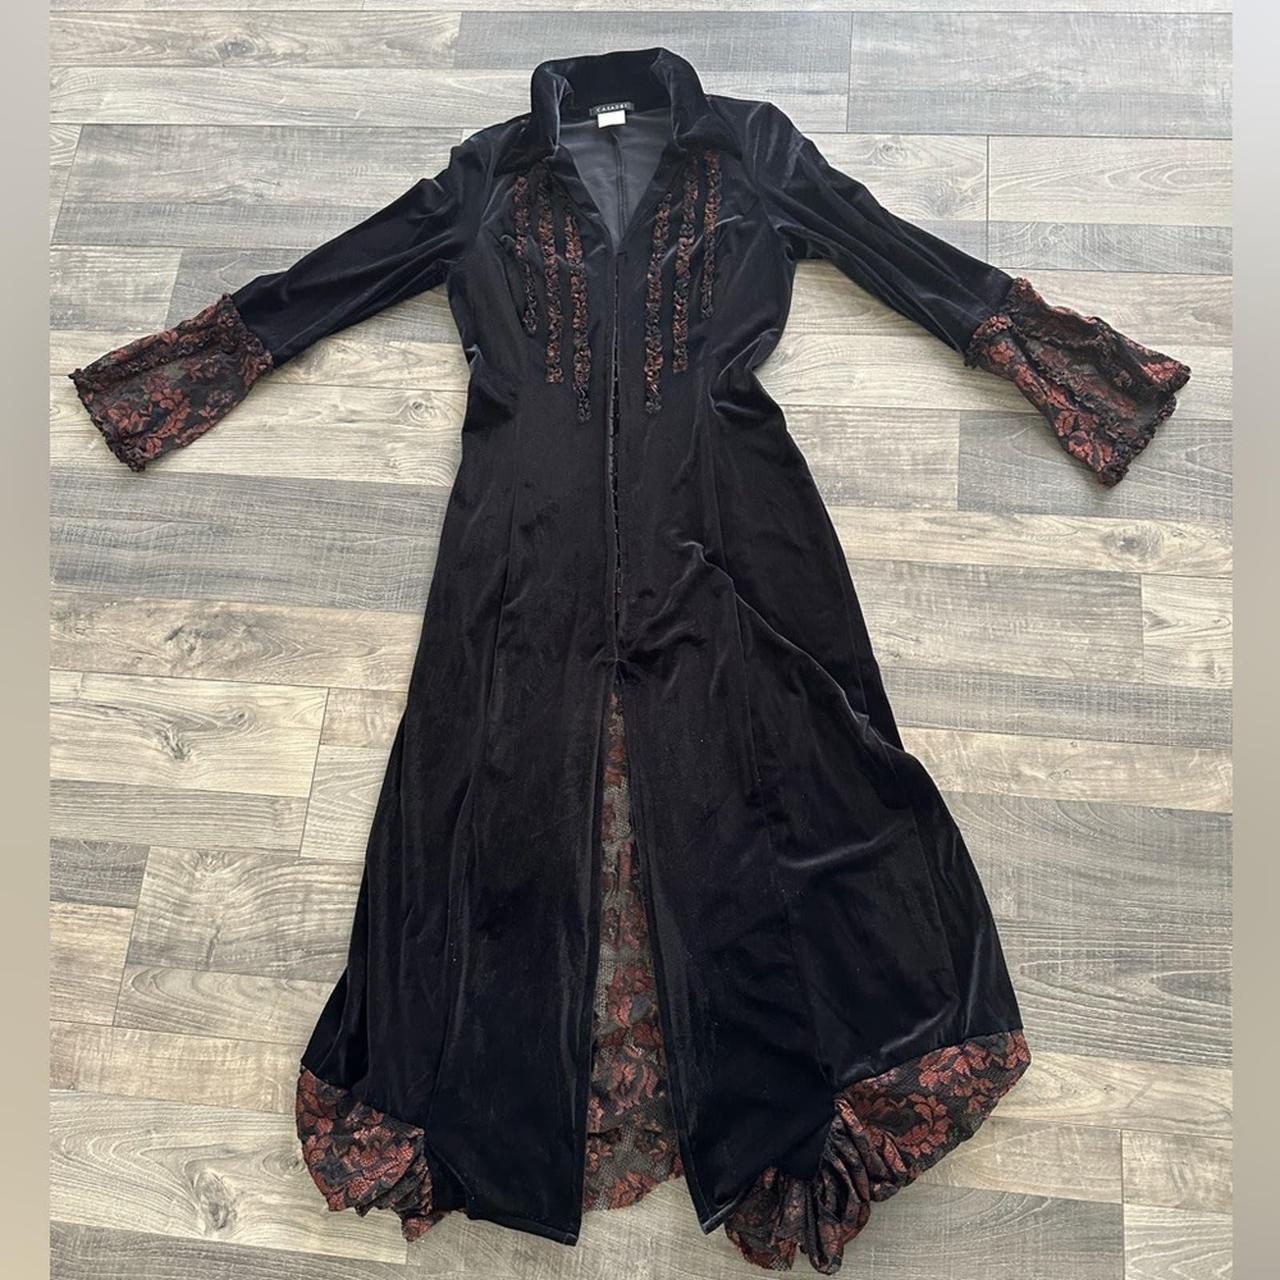 item listed by brokebitchthrifting2